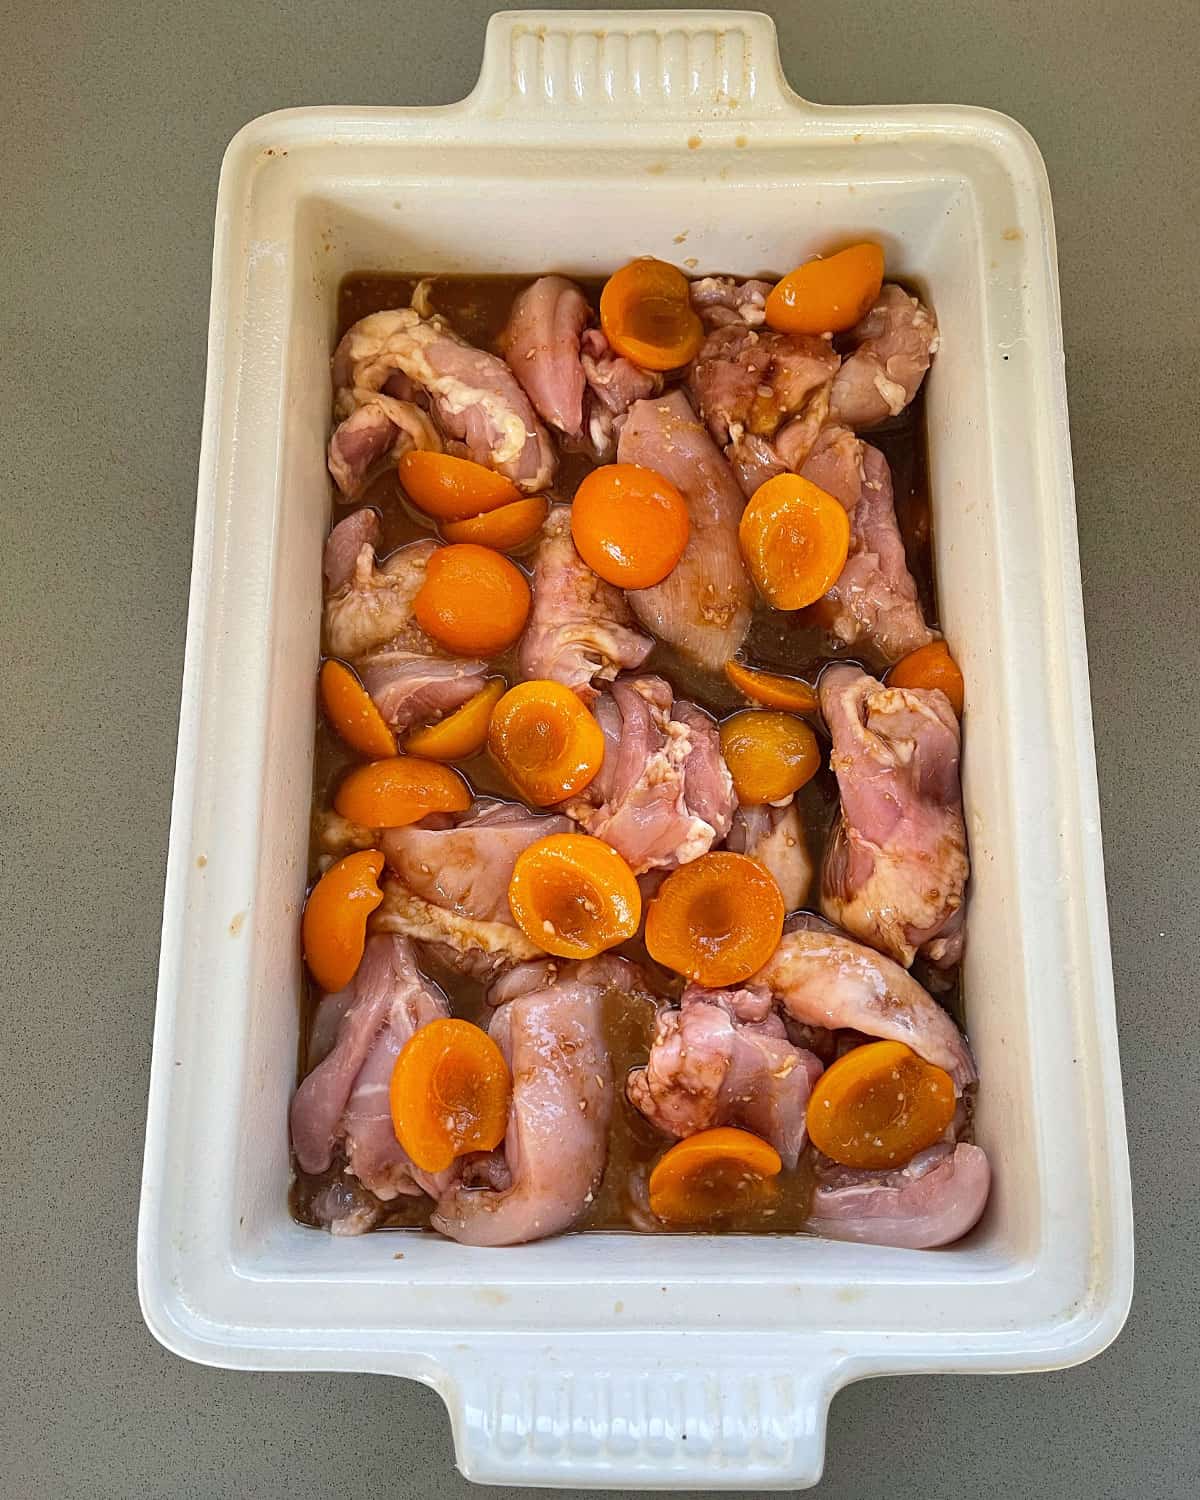 Apricot chicken tray bake before going into the oven